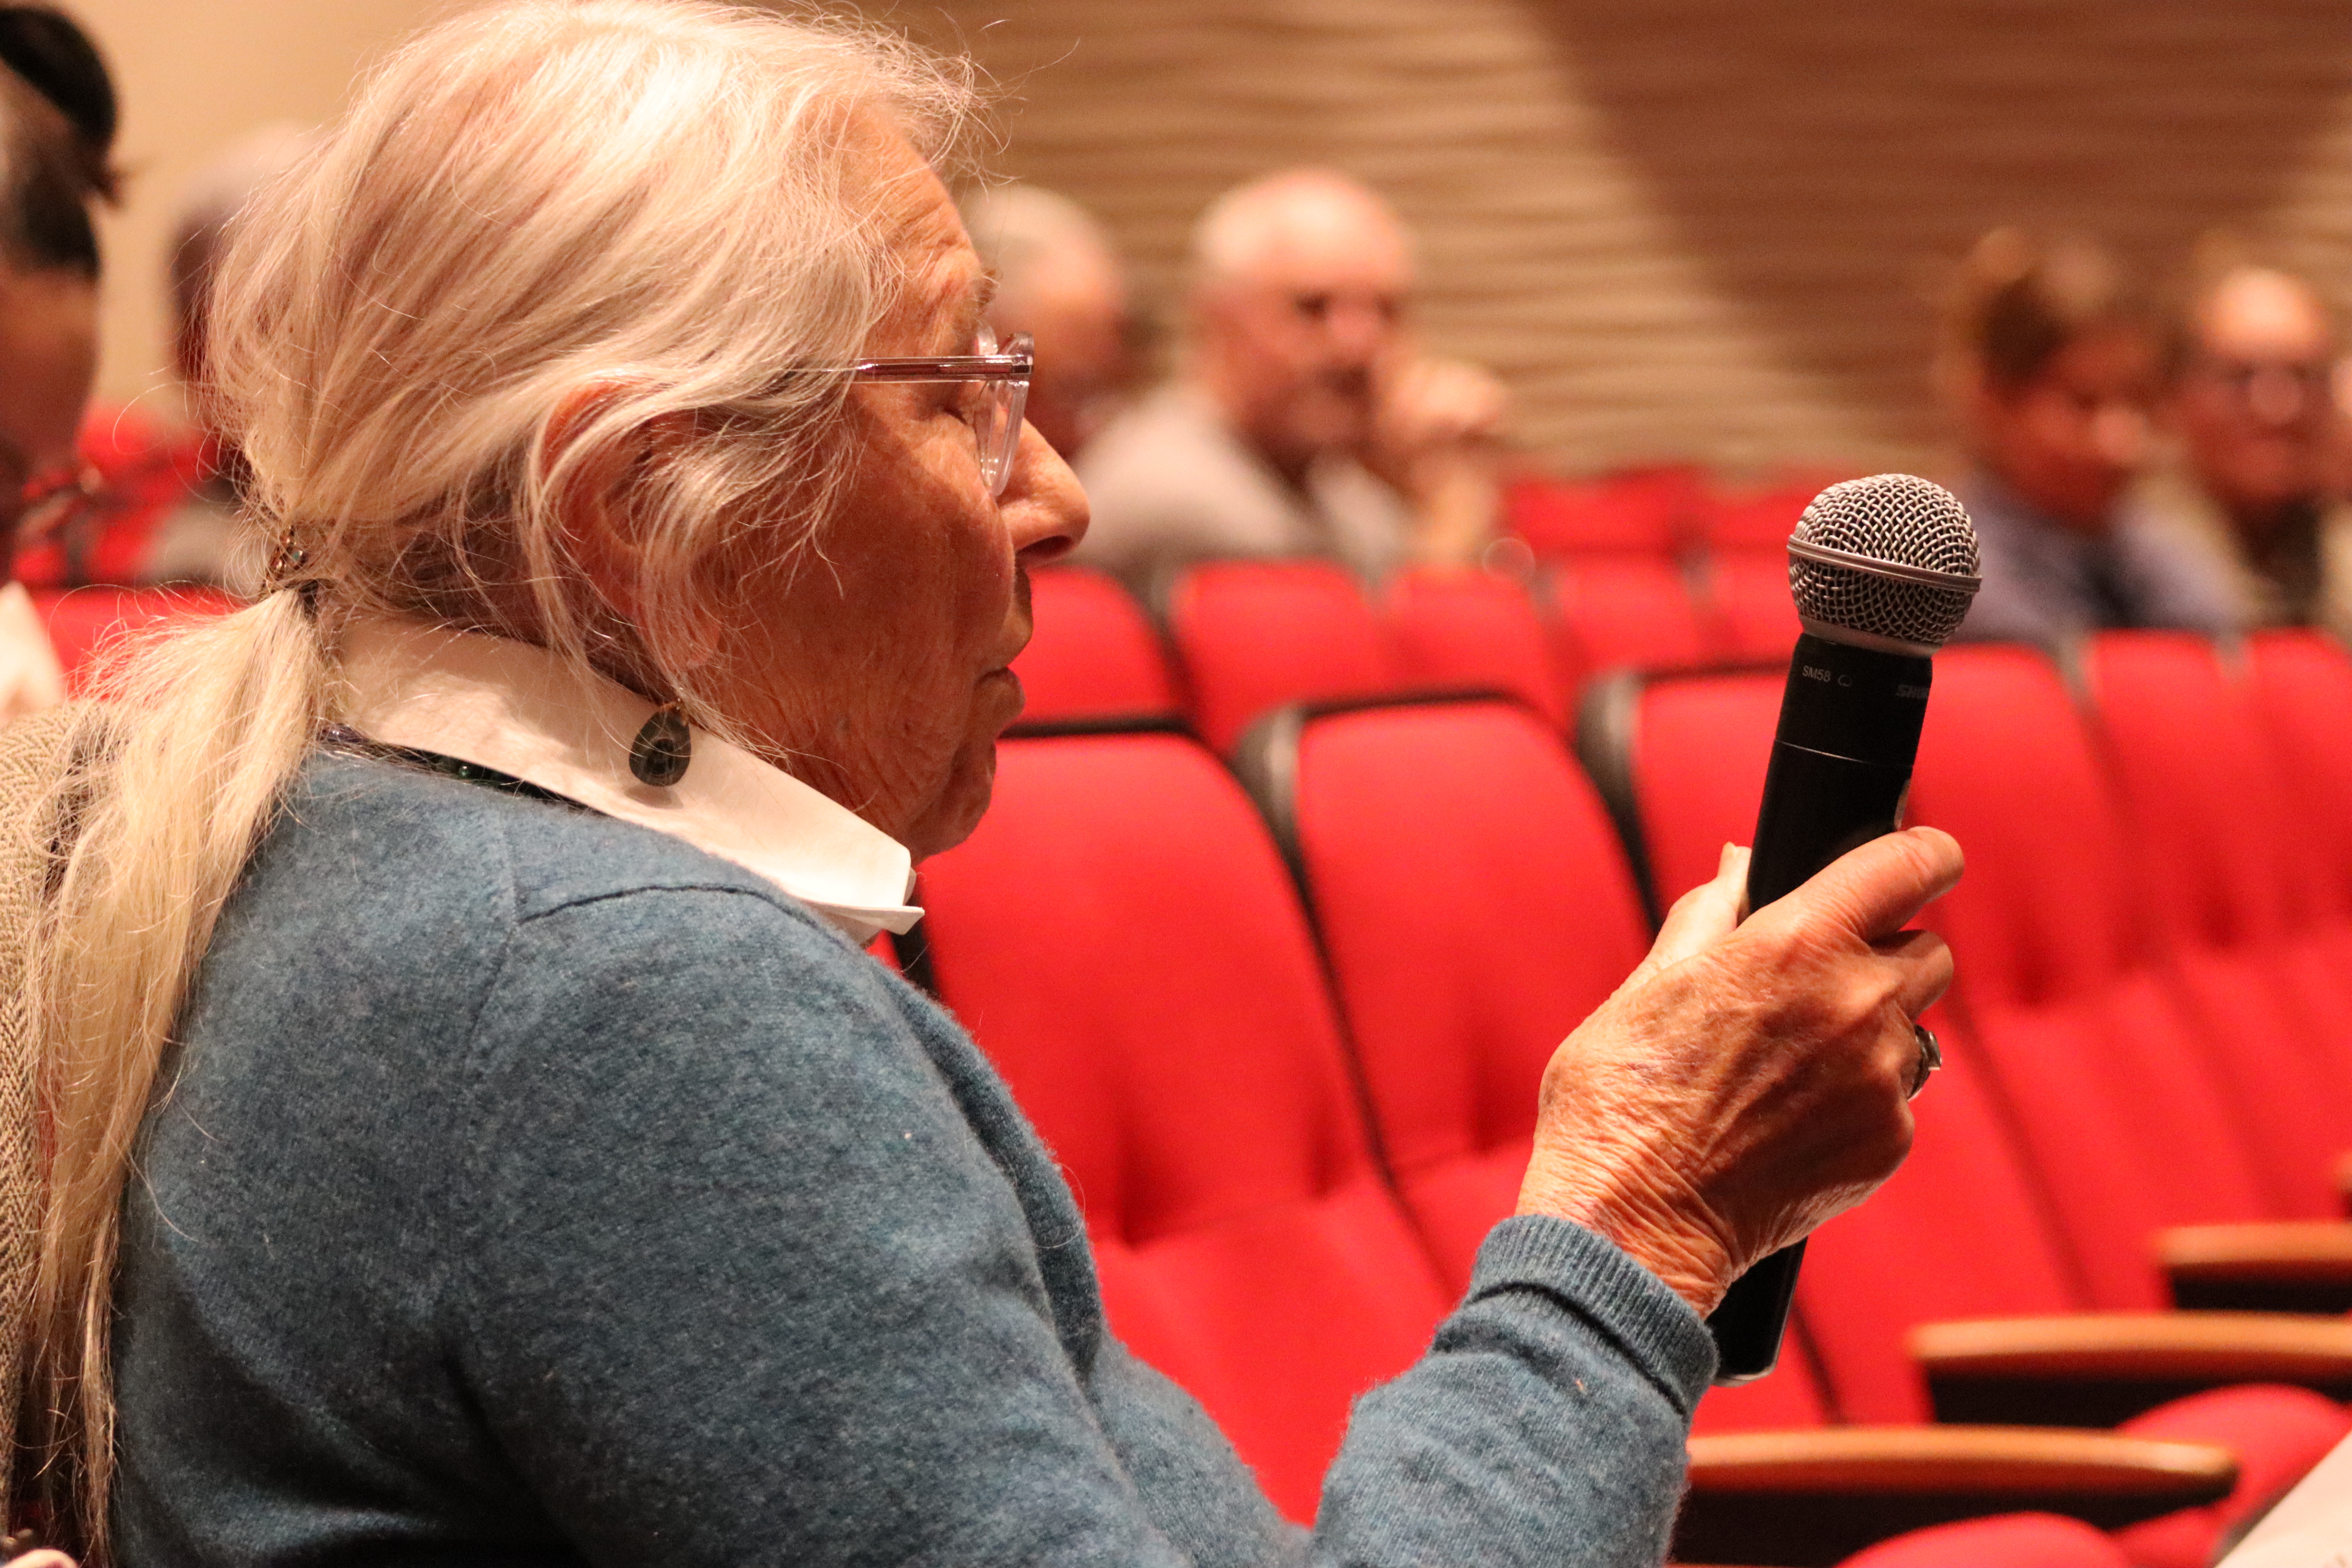 Sag Harbor resident Nada Berry at the latest community forum on the Marsden purchase on Wednesday night in the Pierson Middle High School auditorium. CAILIN RILEY PHOTOS